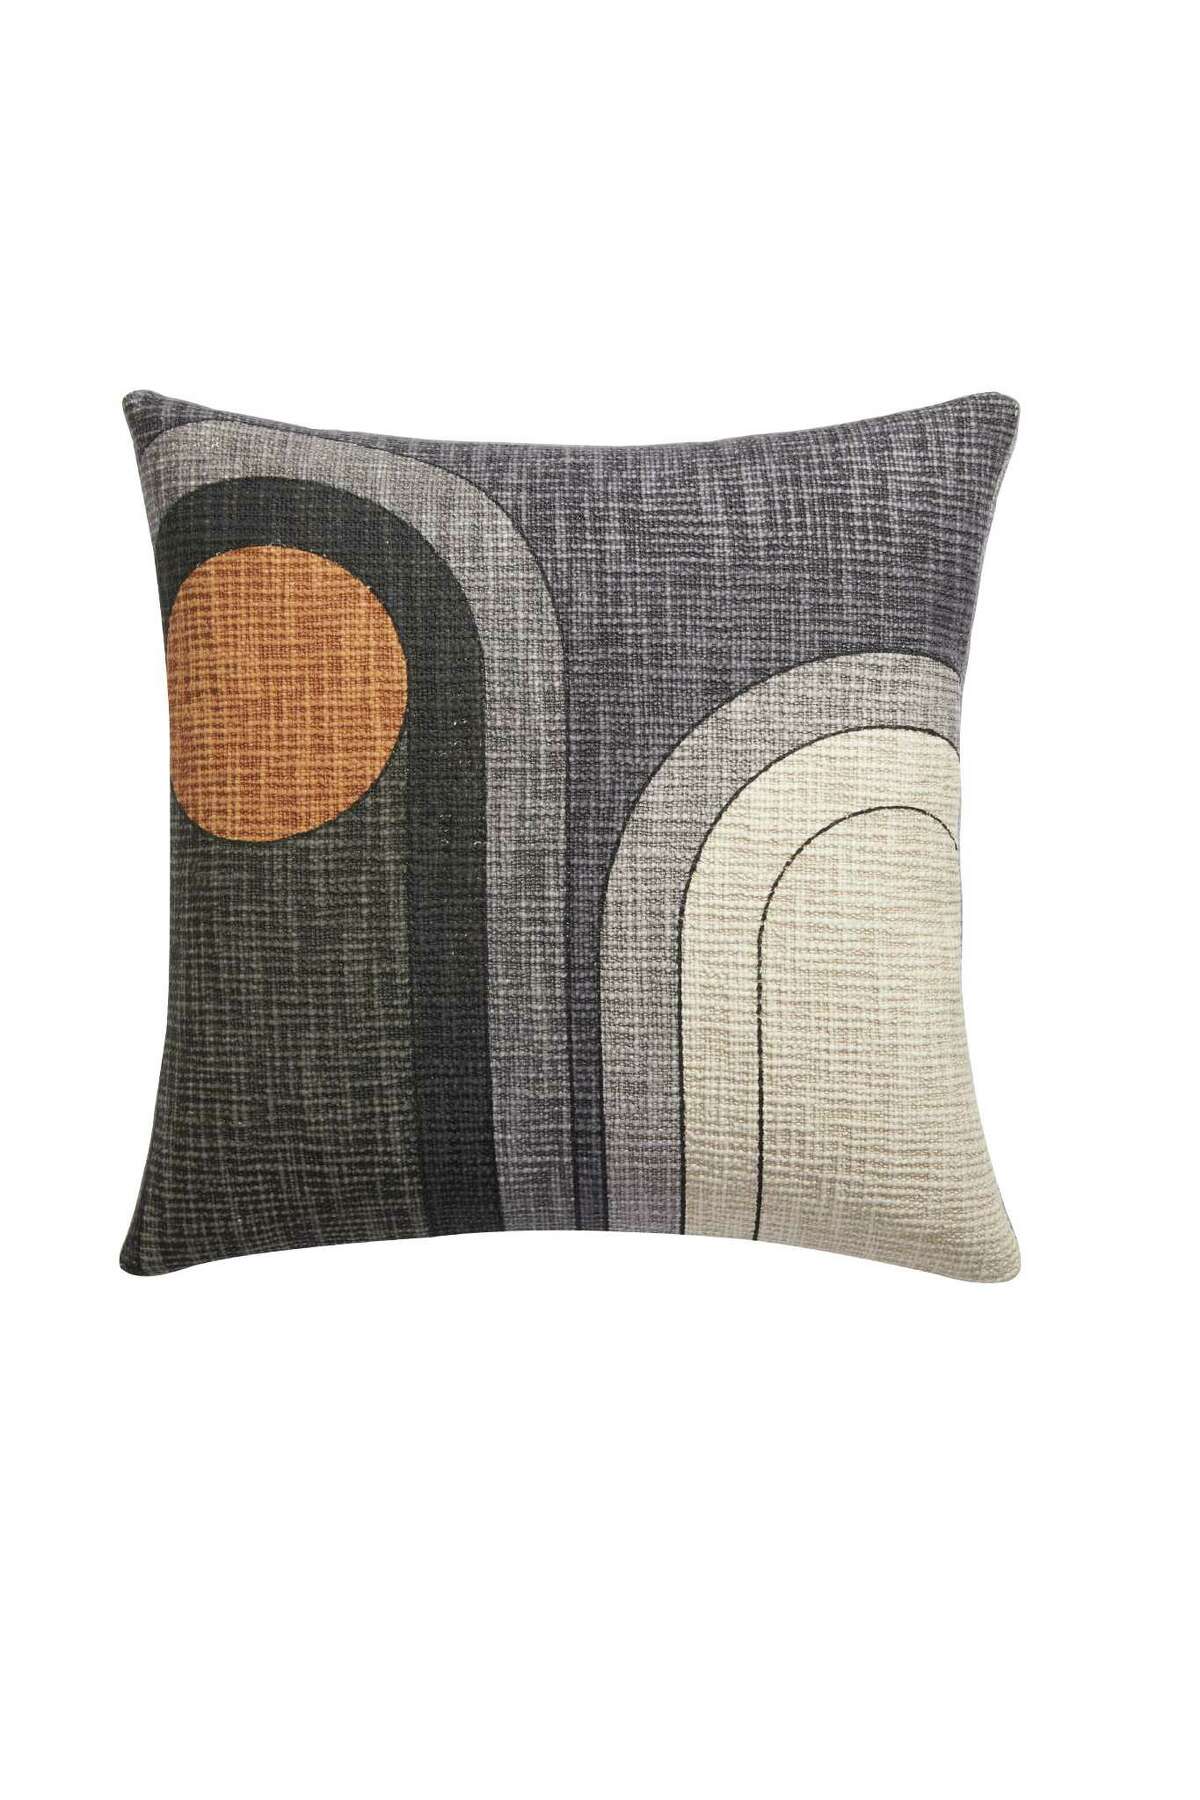 Dream pillow, cotton weave and 18 inches square, $39.95